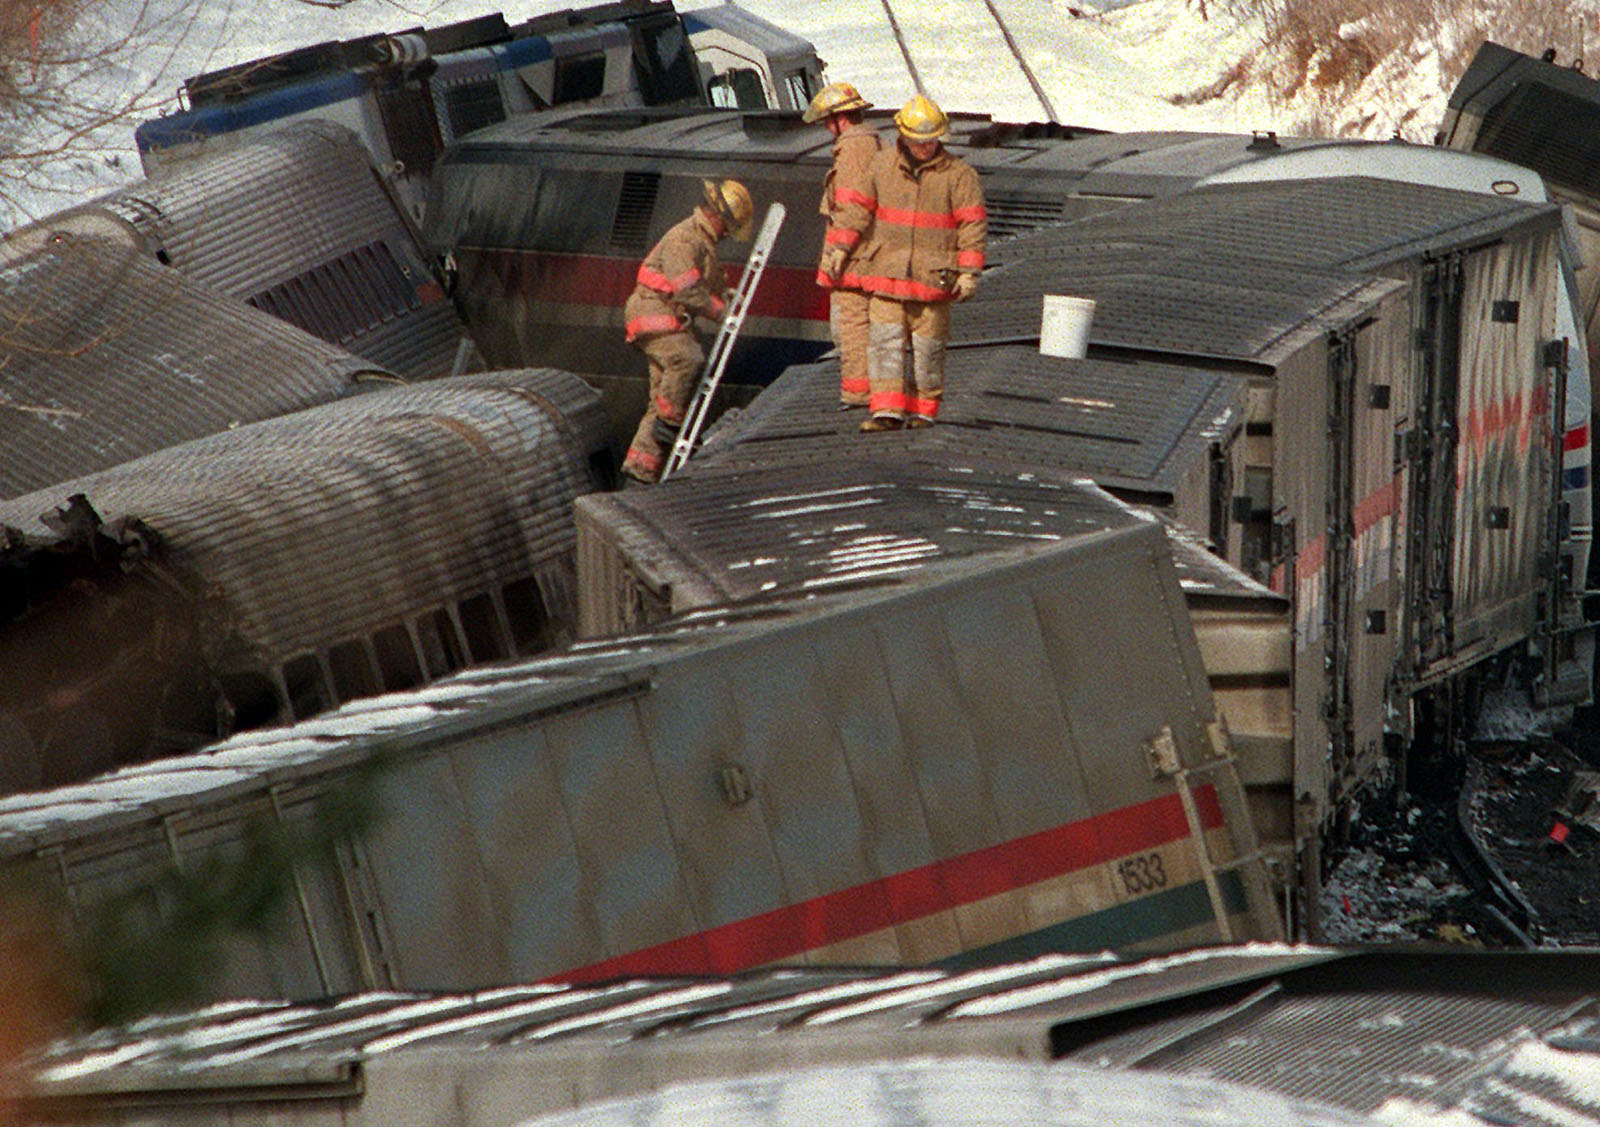 Firemen climb through the wreckage of the burned MARC commuter train in Silver Spring, Md. Saturday Feb. 17, 1996 that was hit by  an Amtrak train  Friday evening. At least 11 passengers on the commuter train were killed.   (AP Photo/Ruth Fremson)